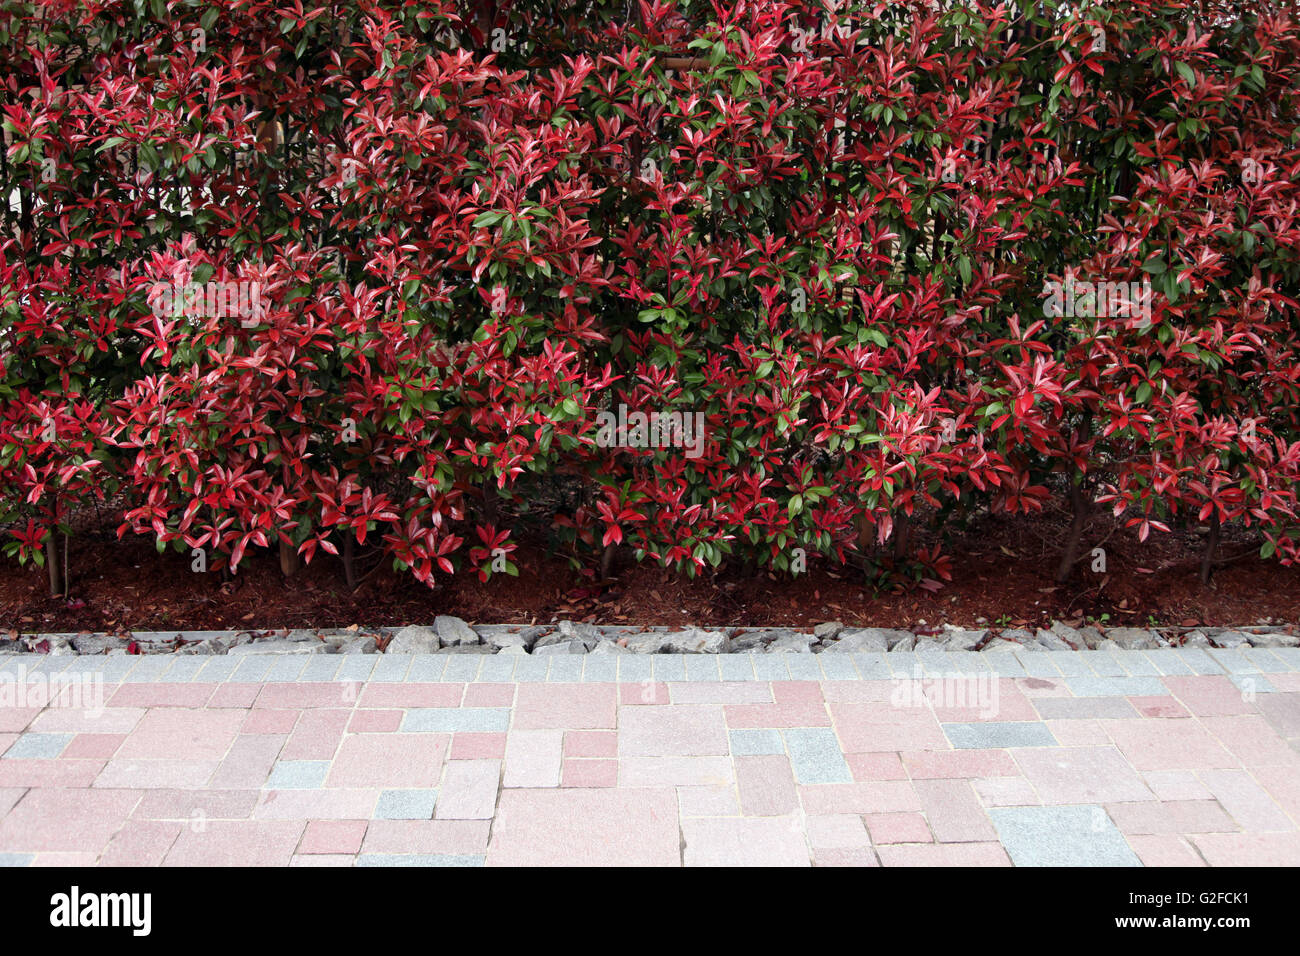 It's a photo of a vegetal wall: an hedge made with red plants or bushes along the pavement. Stock Photo